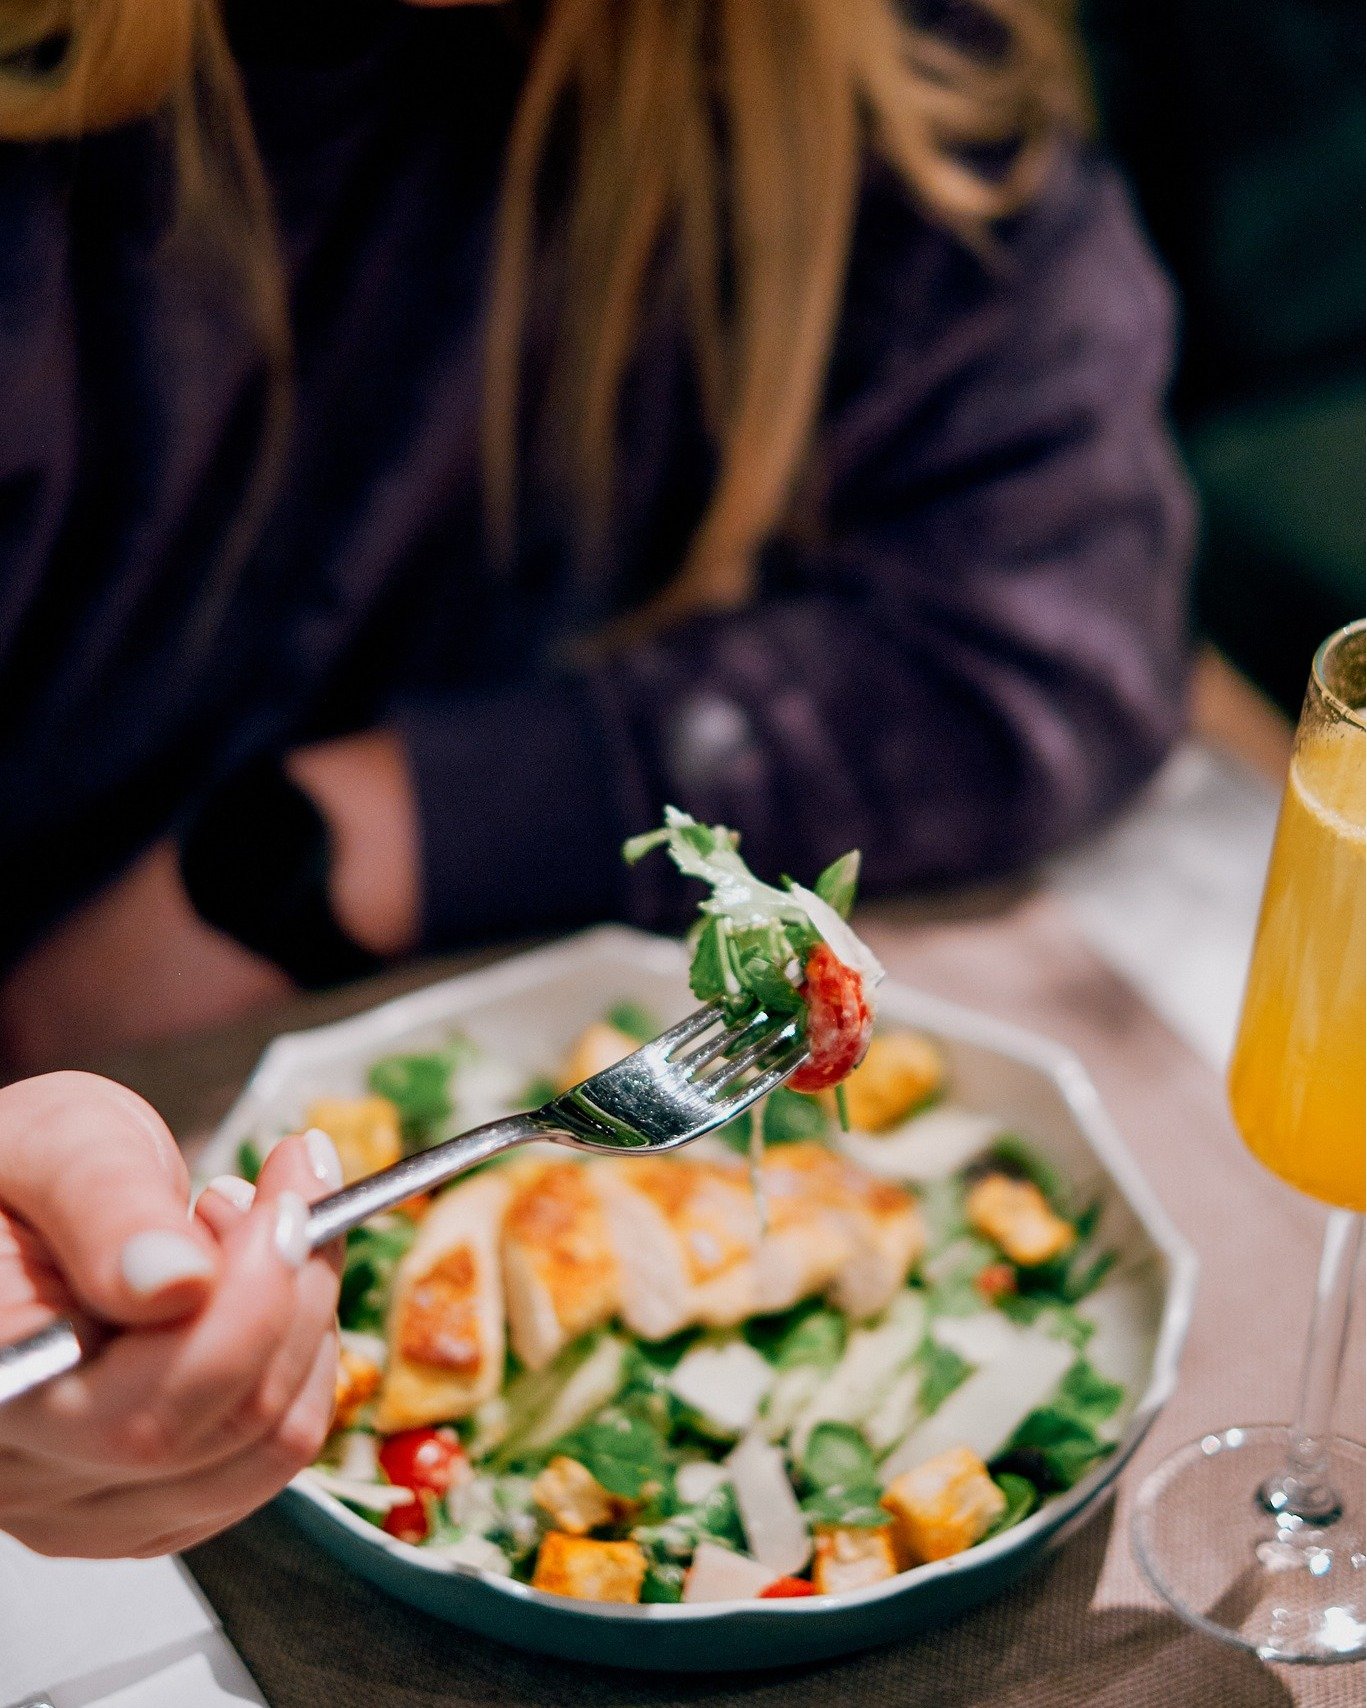 🤭 Probably the most famous dishes on our menu after the Easter break. 

Caesar Salad with perfectly cooked chicken, Parmigiano Reggiano, Caesar sauce, avocado &amp; tomatoes or, if you prefer a meatless option, you can choose our Halloumi Salad with